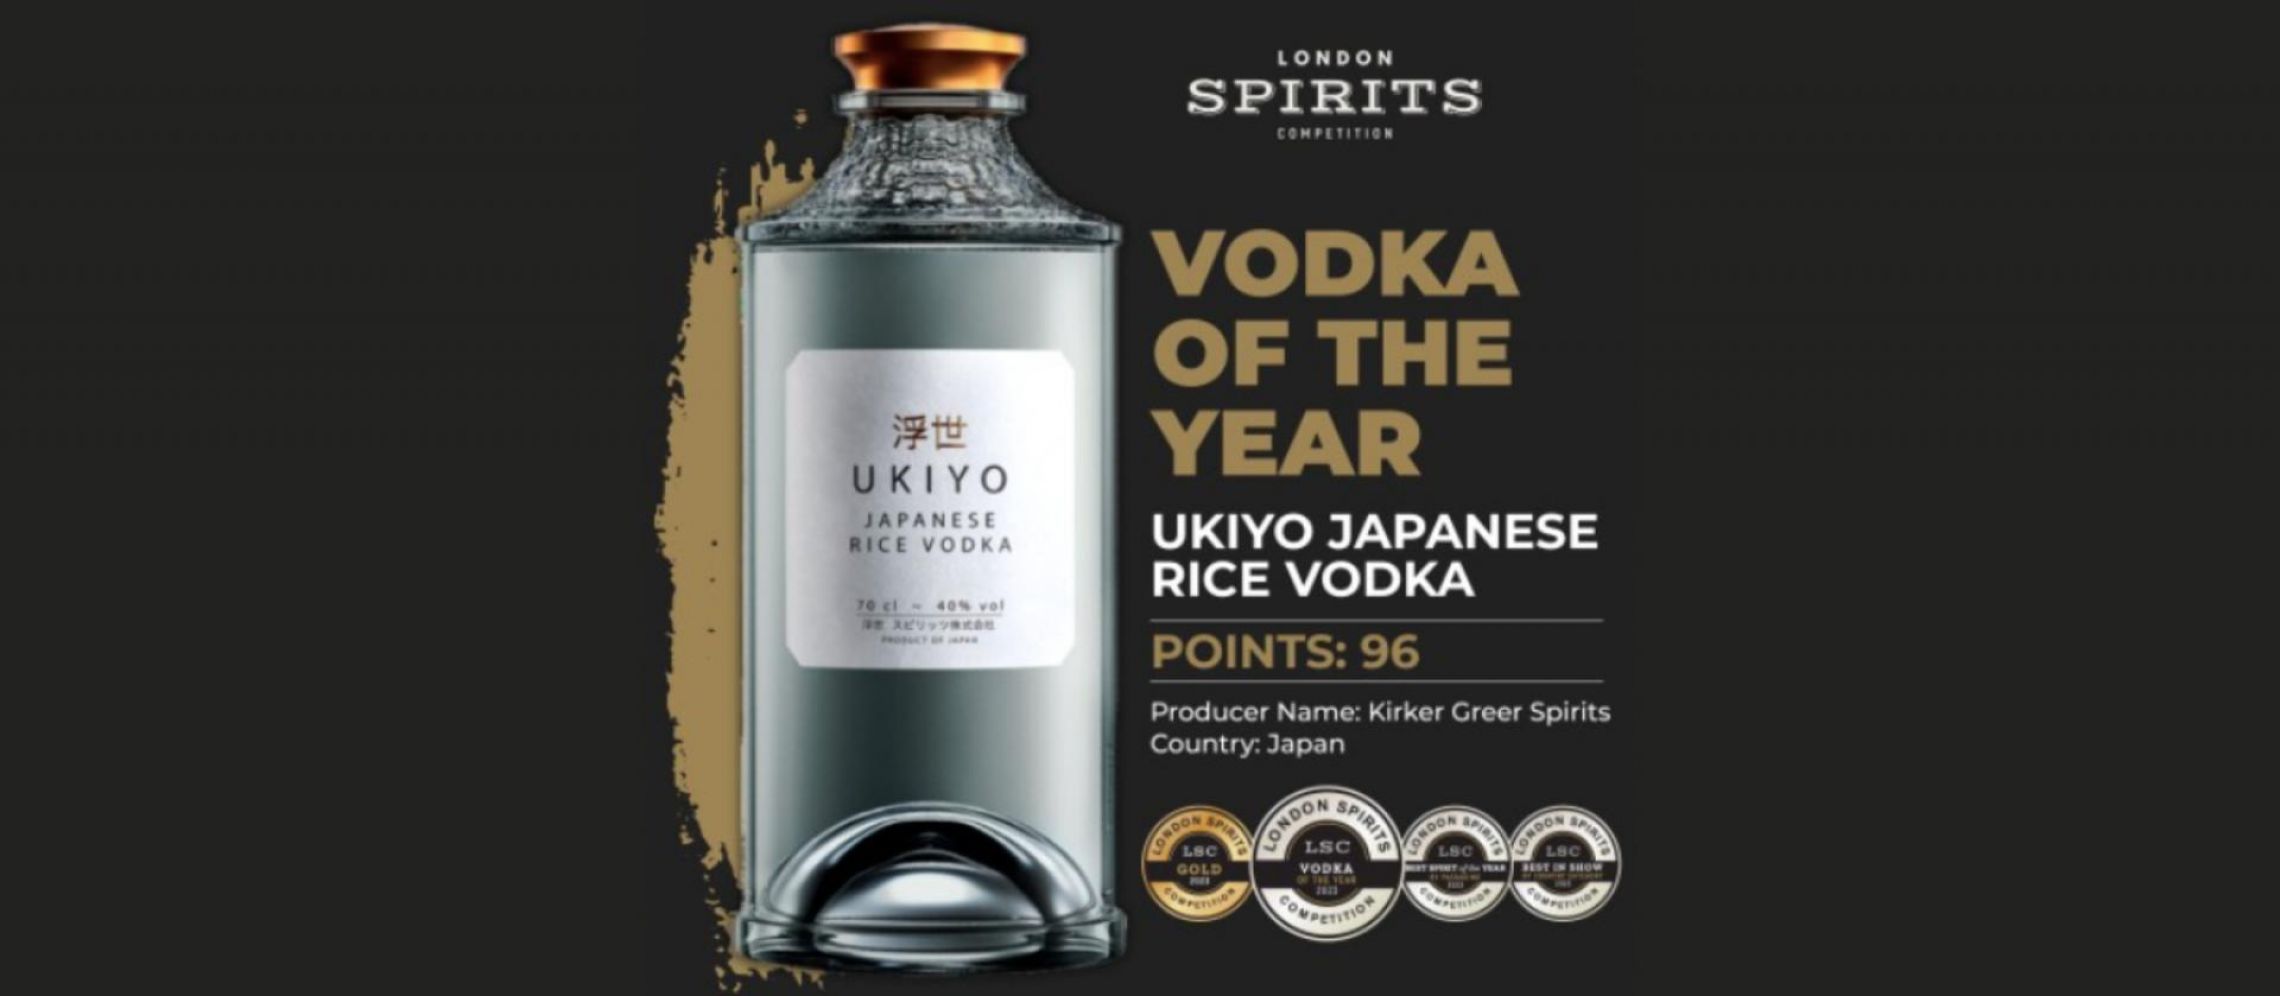 Photo for: Ukiyo Japanese Rice Vodka: Crafting Excellence Recognized by London Spirits Competition